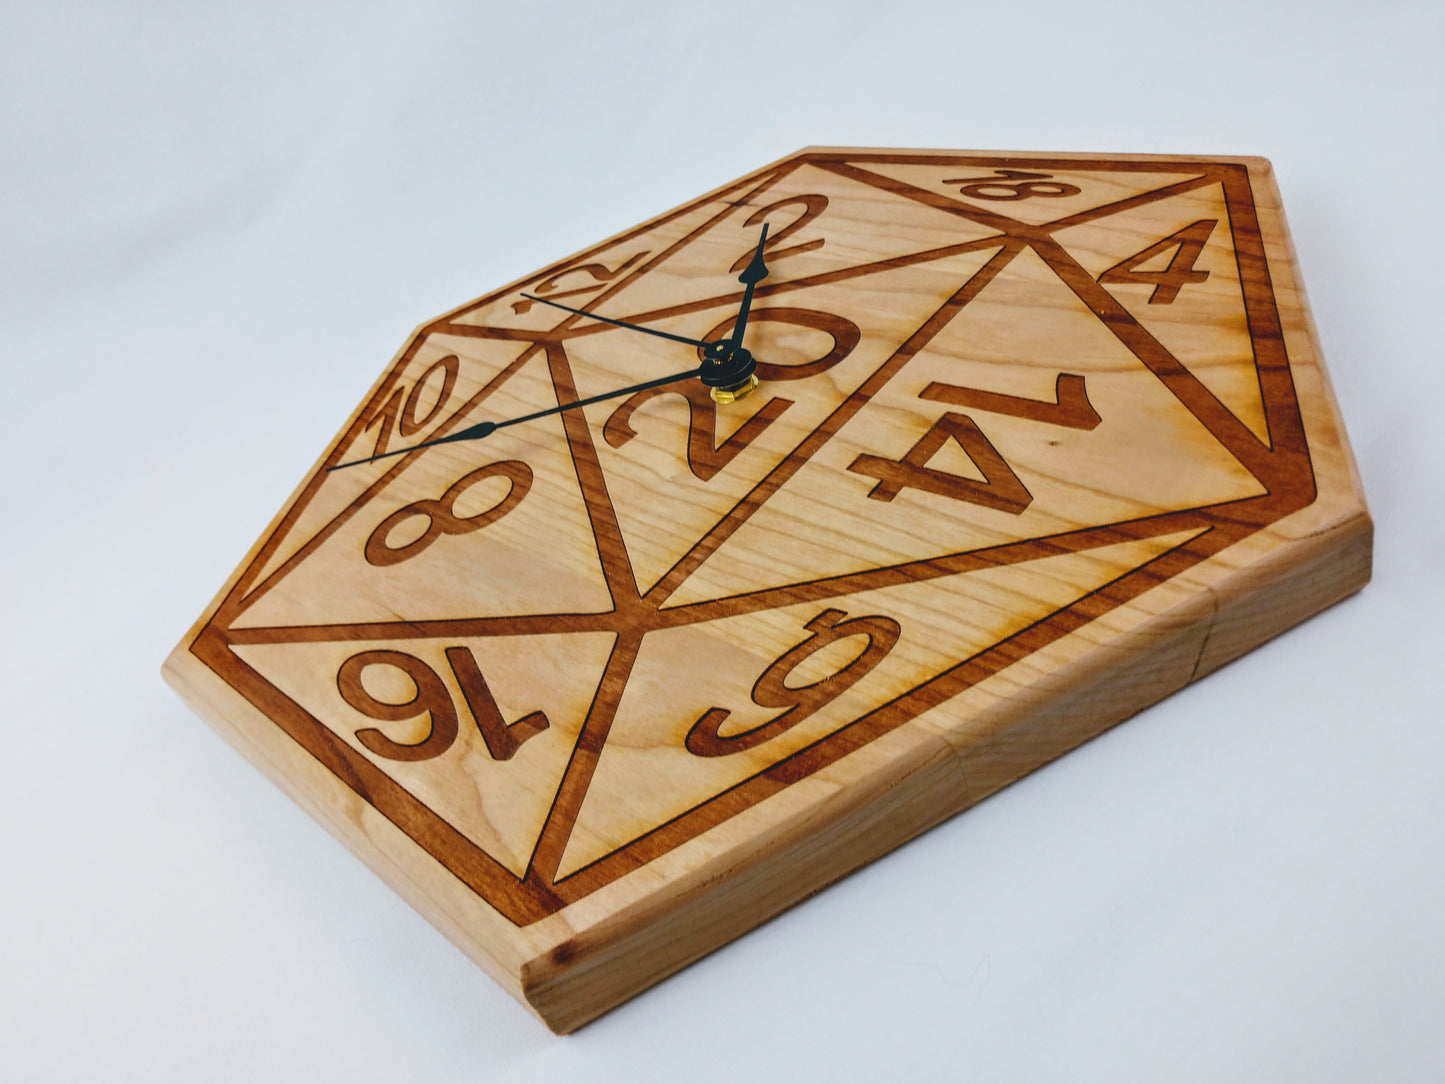 D20 Wall Clock in Solid American Cherry Wood - Hard Candy Woodshop